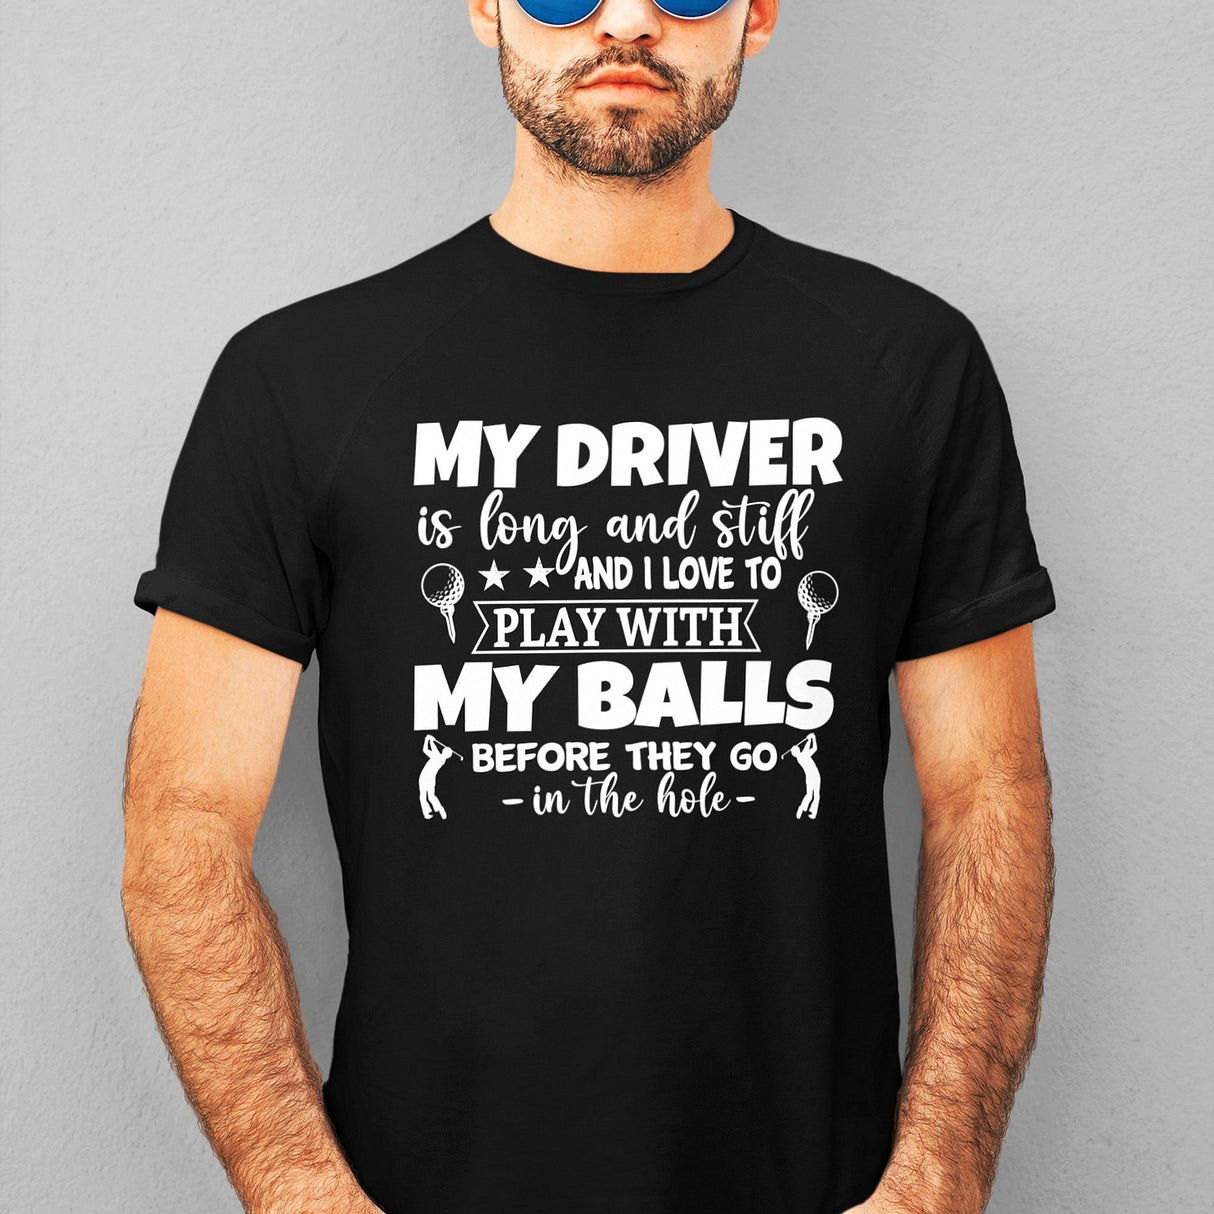 my-driver-is-hard-and-stiff-and-i-love-to-play-with-my-balls-before-they-go-in-the-hole-sports-tee-golf-t-shirt-sports-tee-golf-t-shirt-driver-tee#color_black